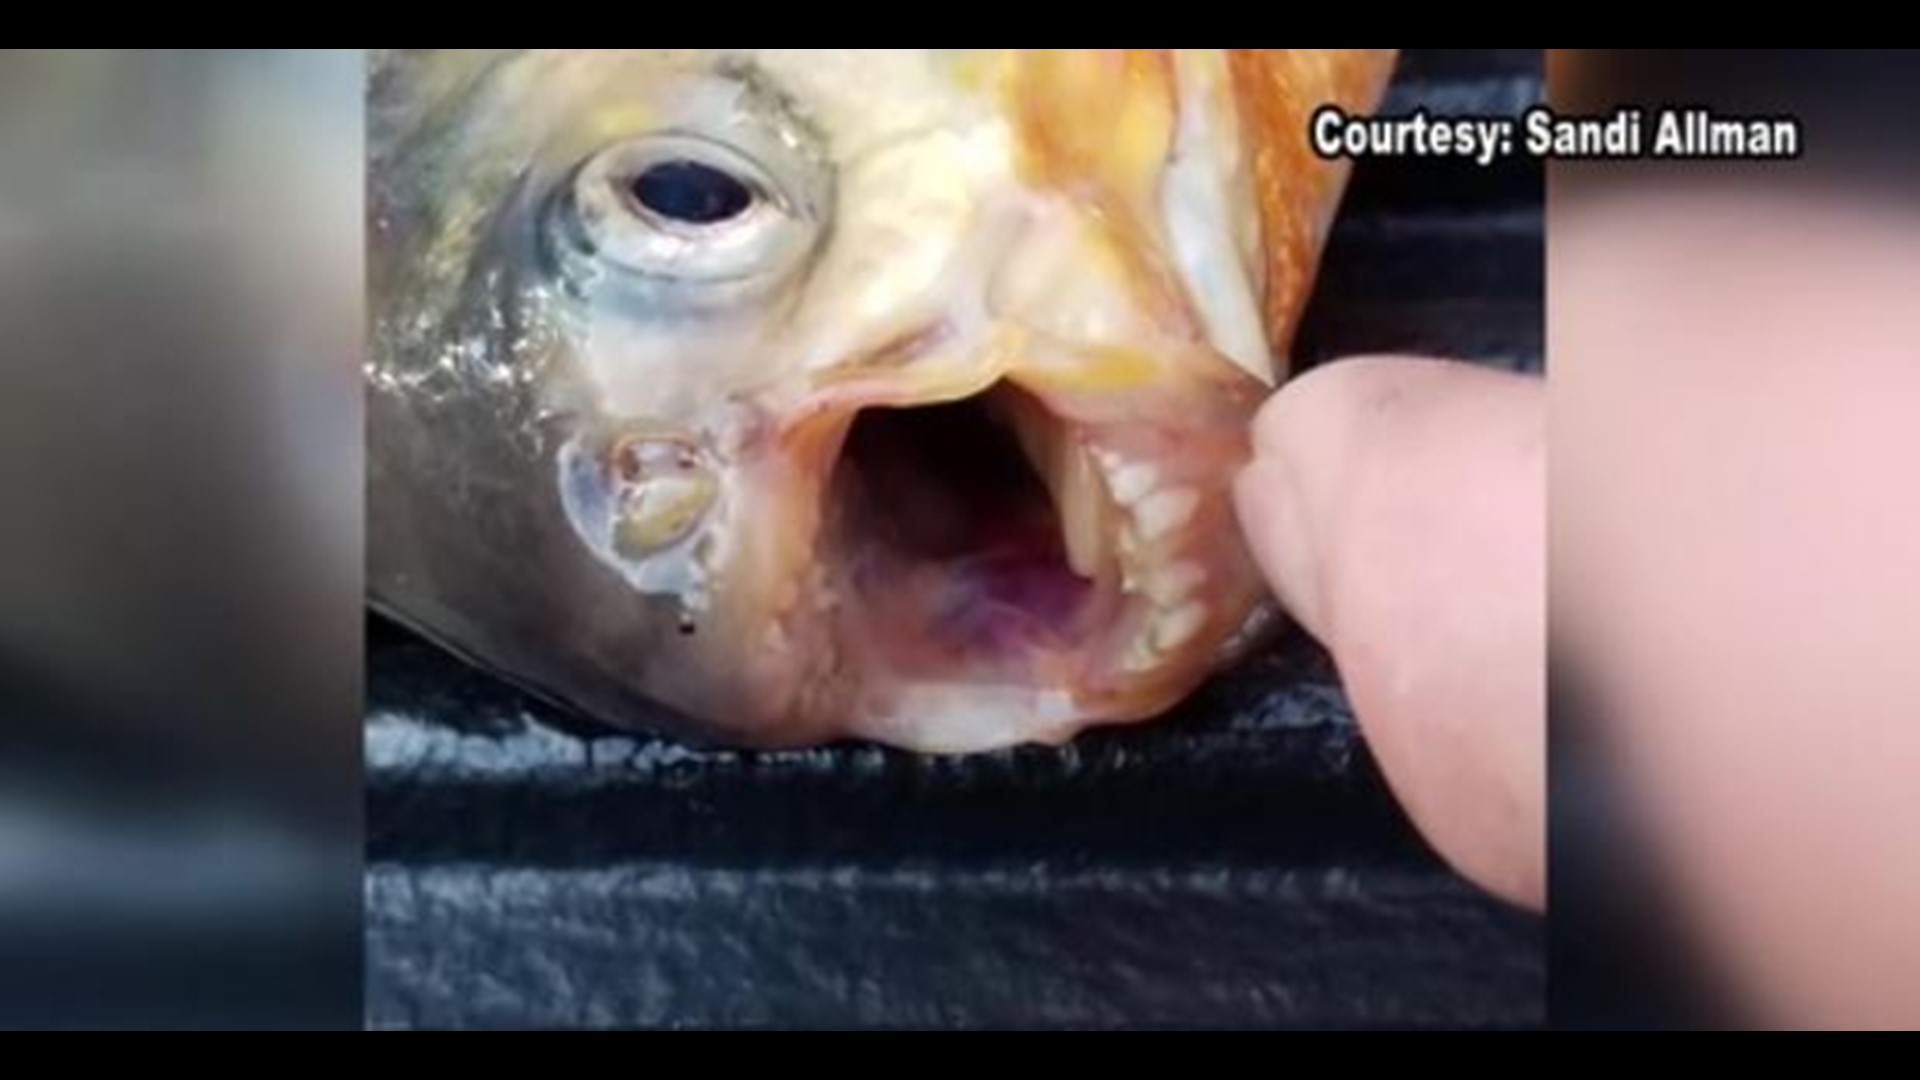 A fisherman reeled in a scary find on the Catawba River. It’s a pacu fish that has a mouthful of human-like teeth!